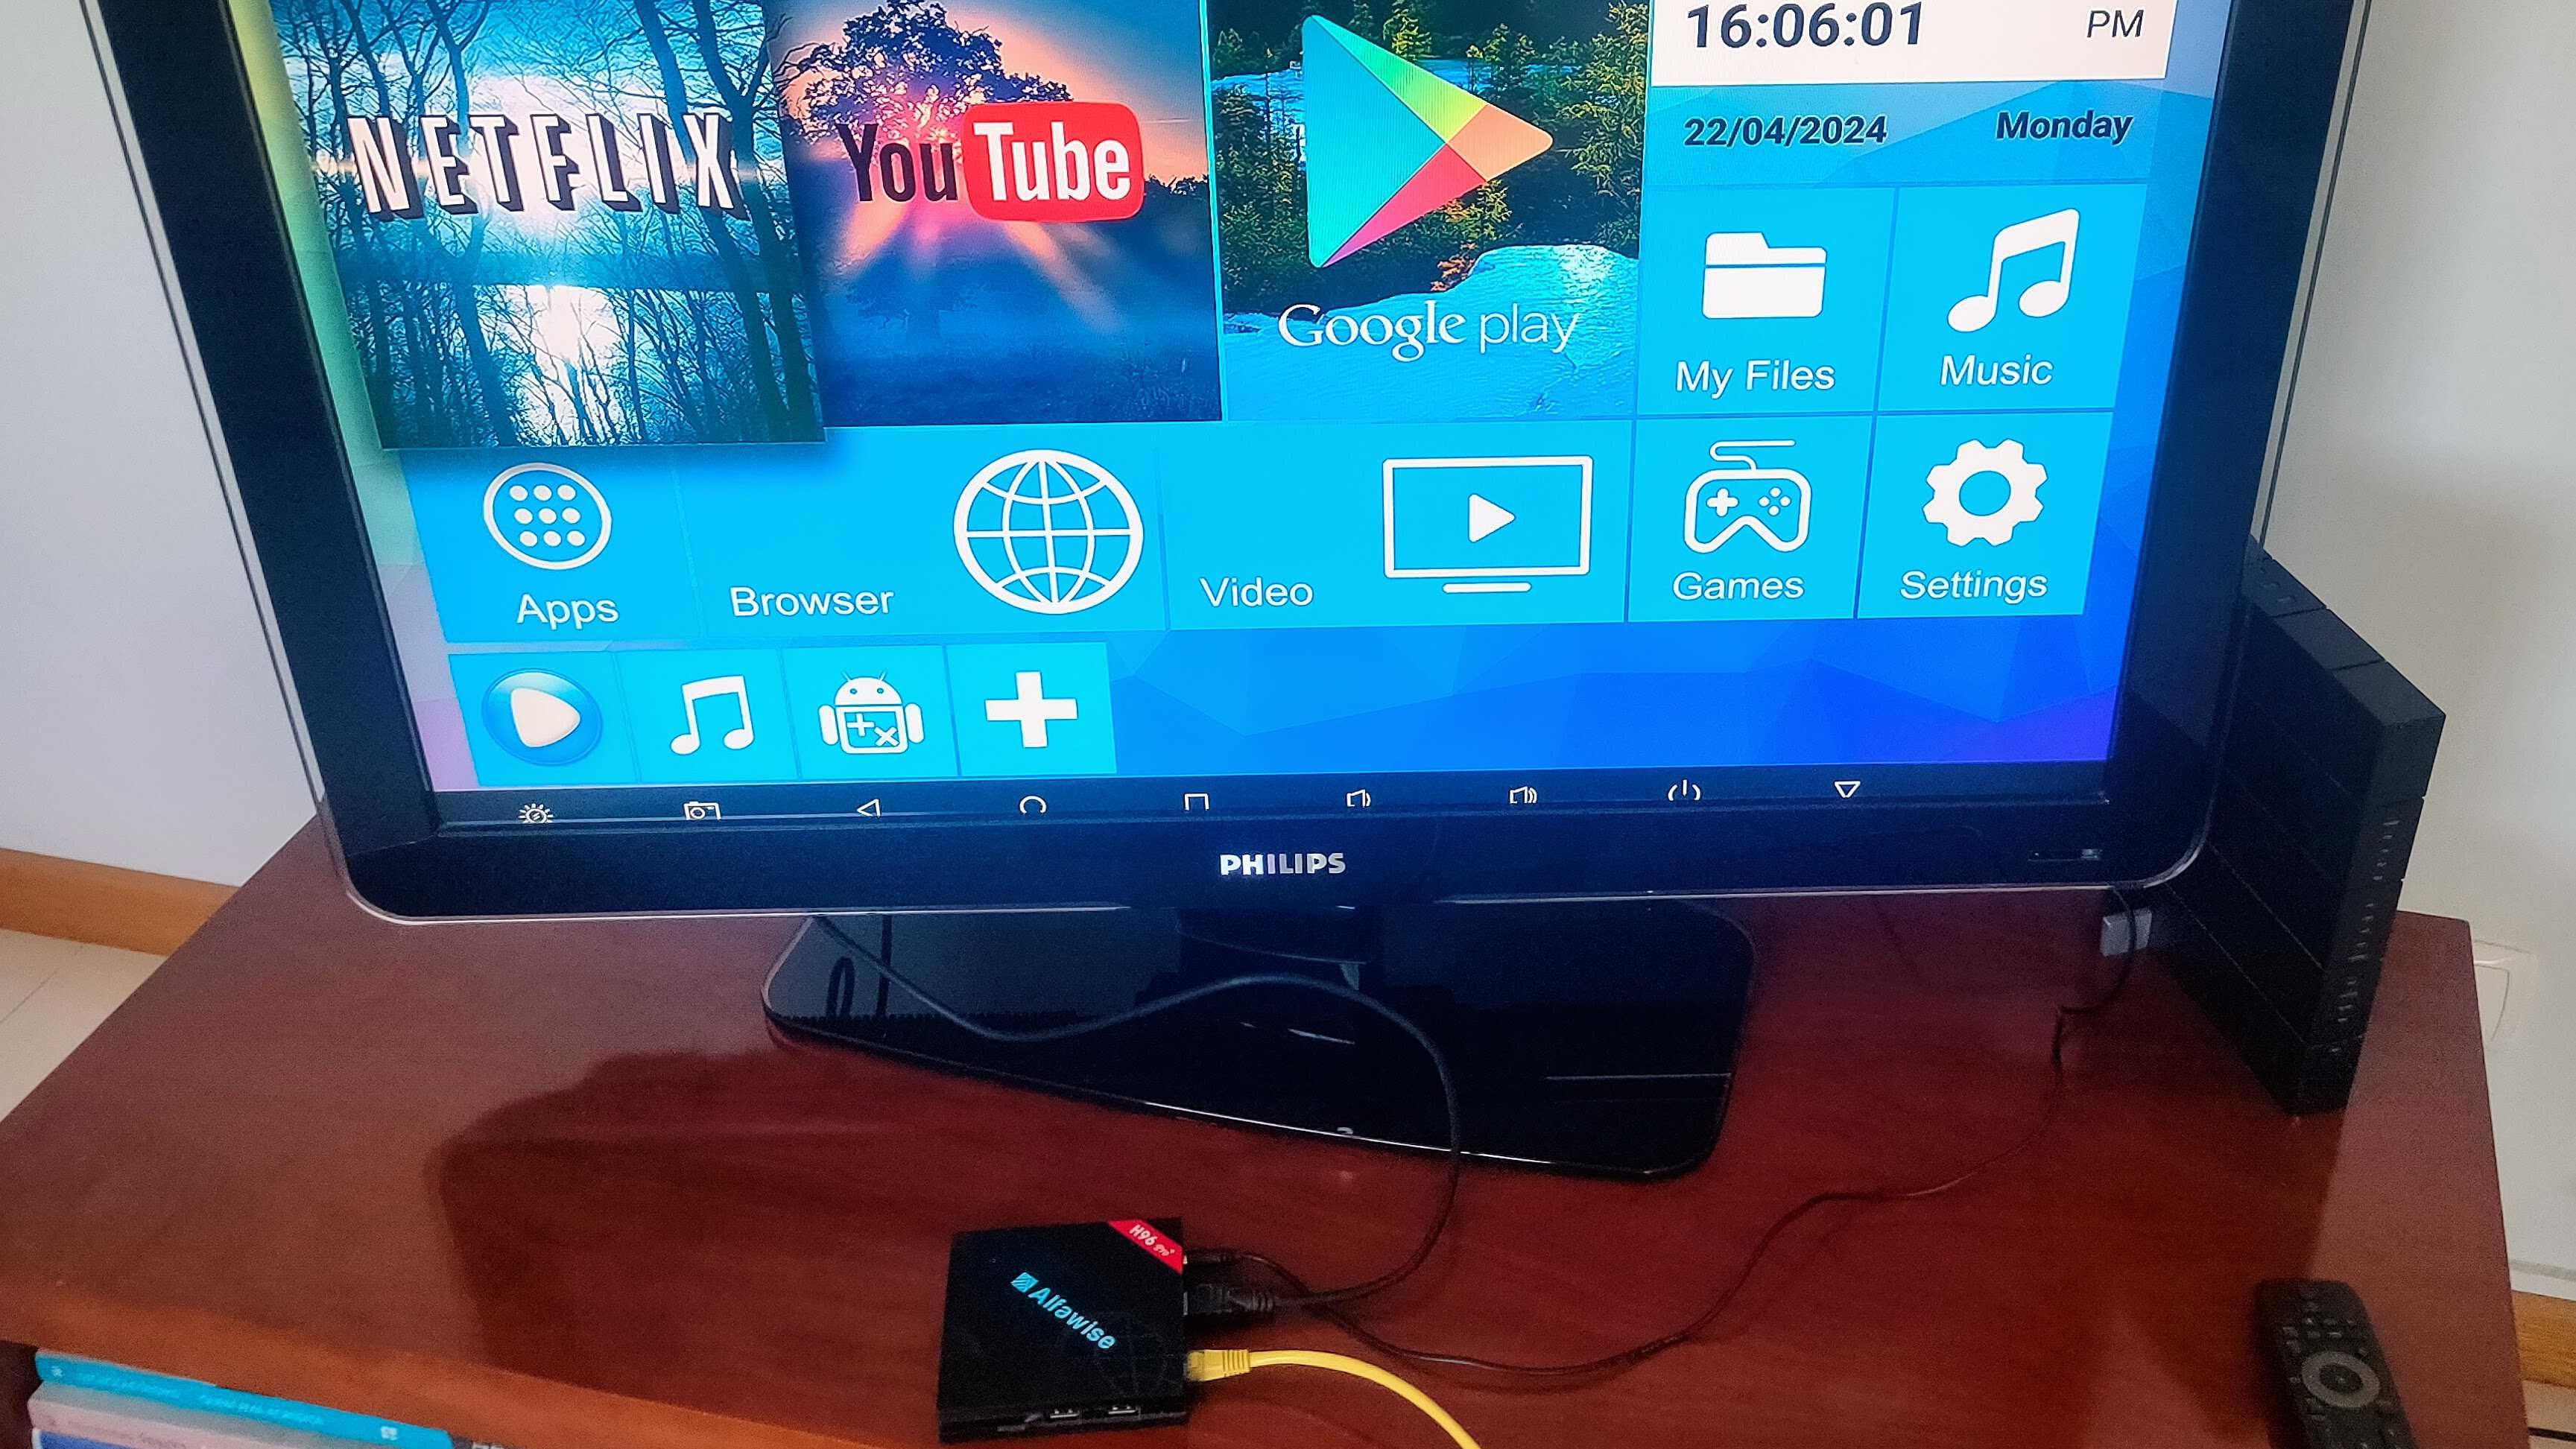 Android Box H96 pro Alfawise